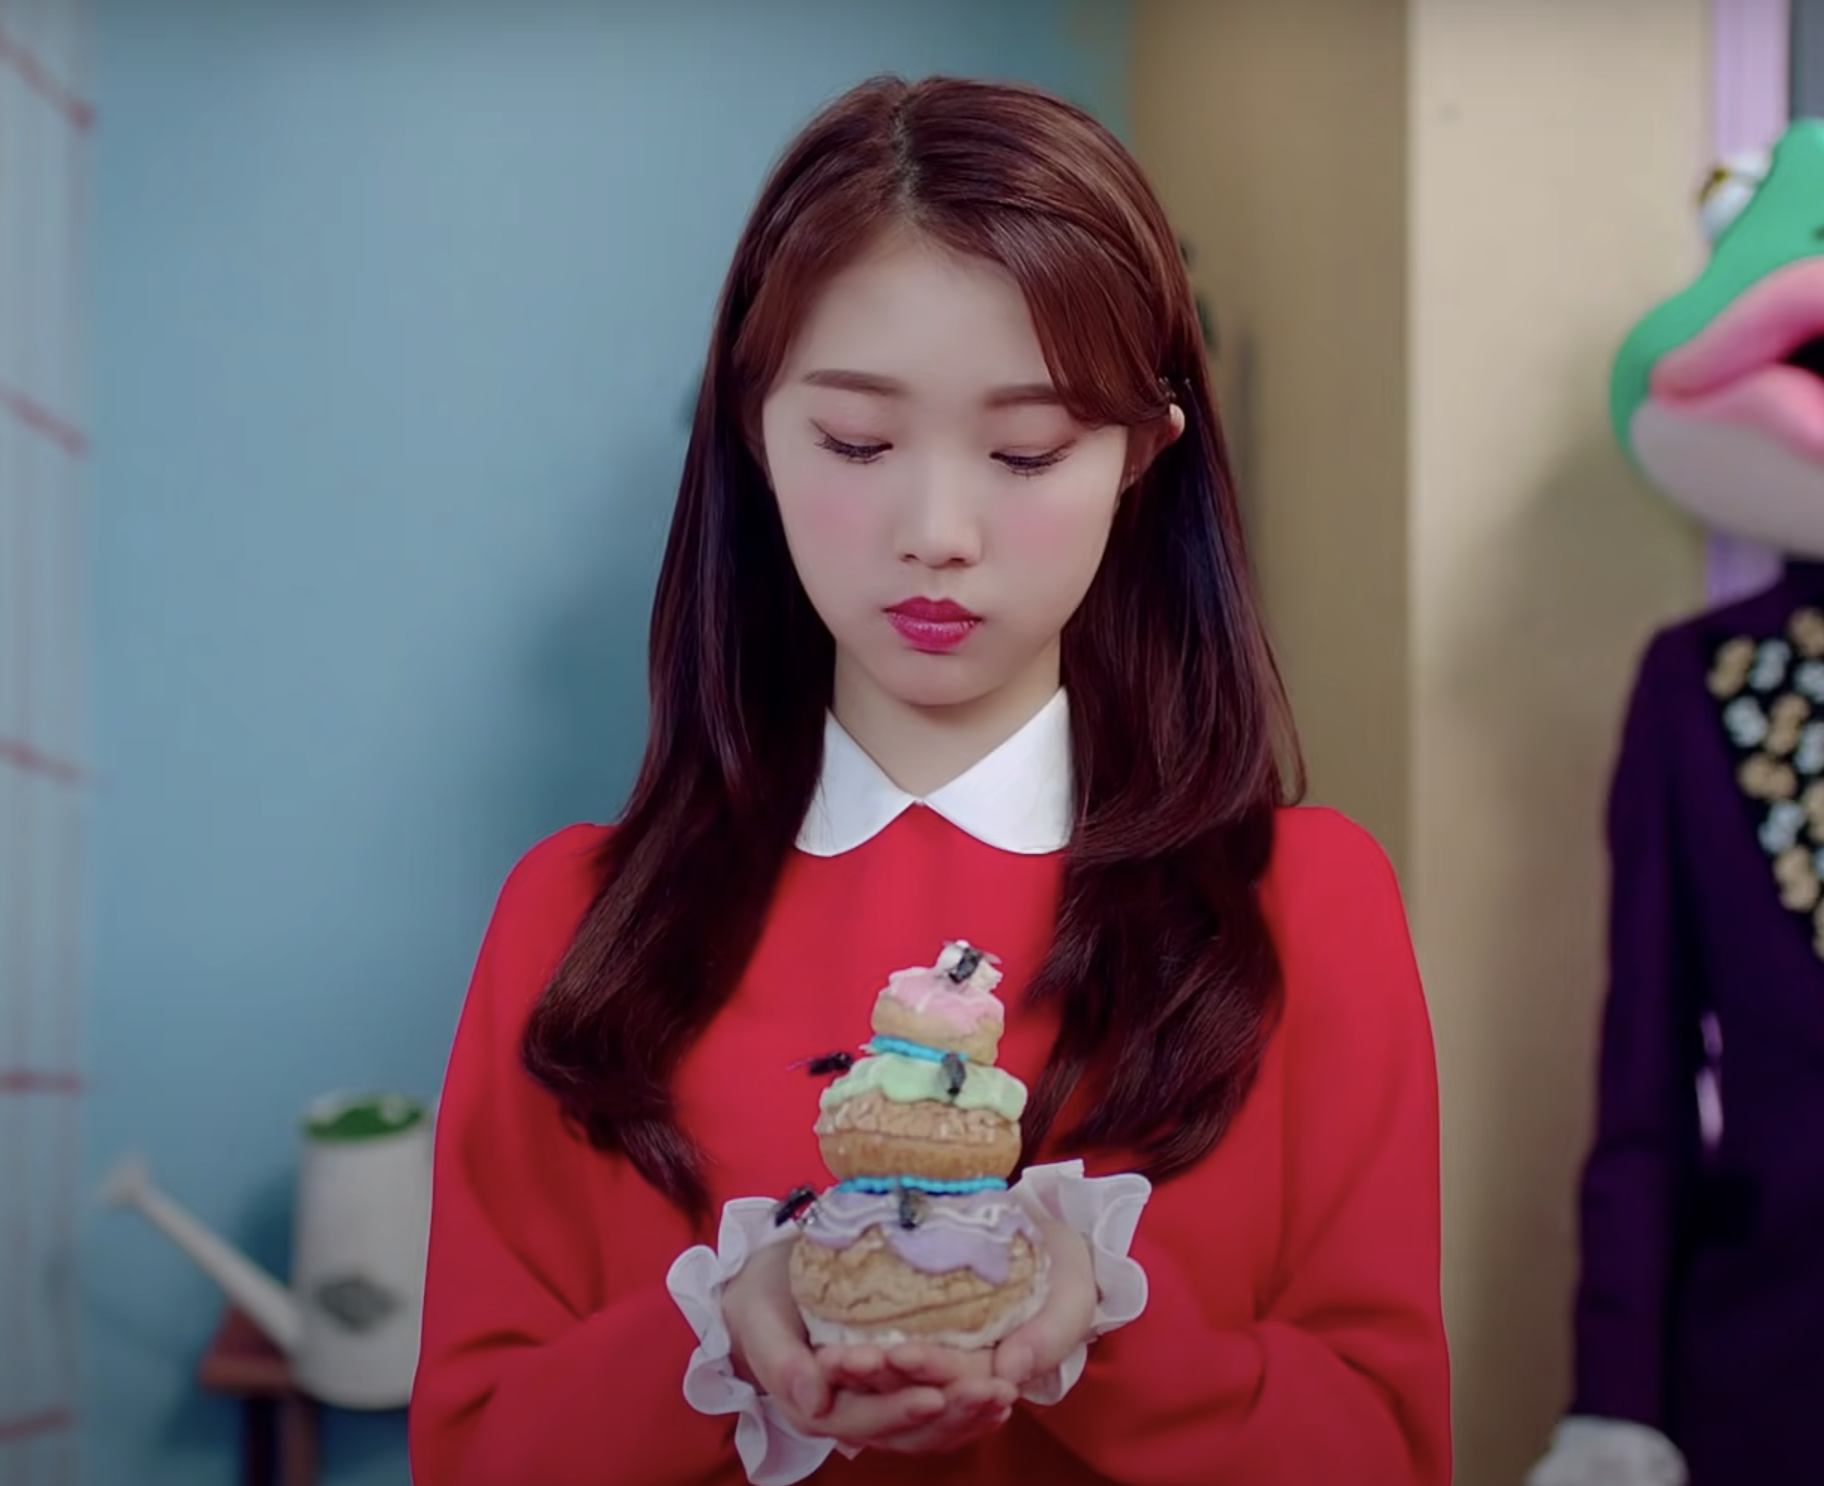 YeoJin holds a cake in her hands covered in flies